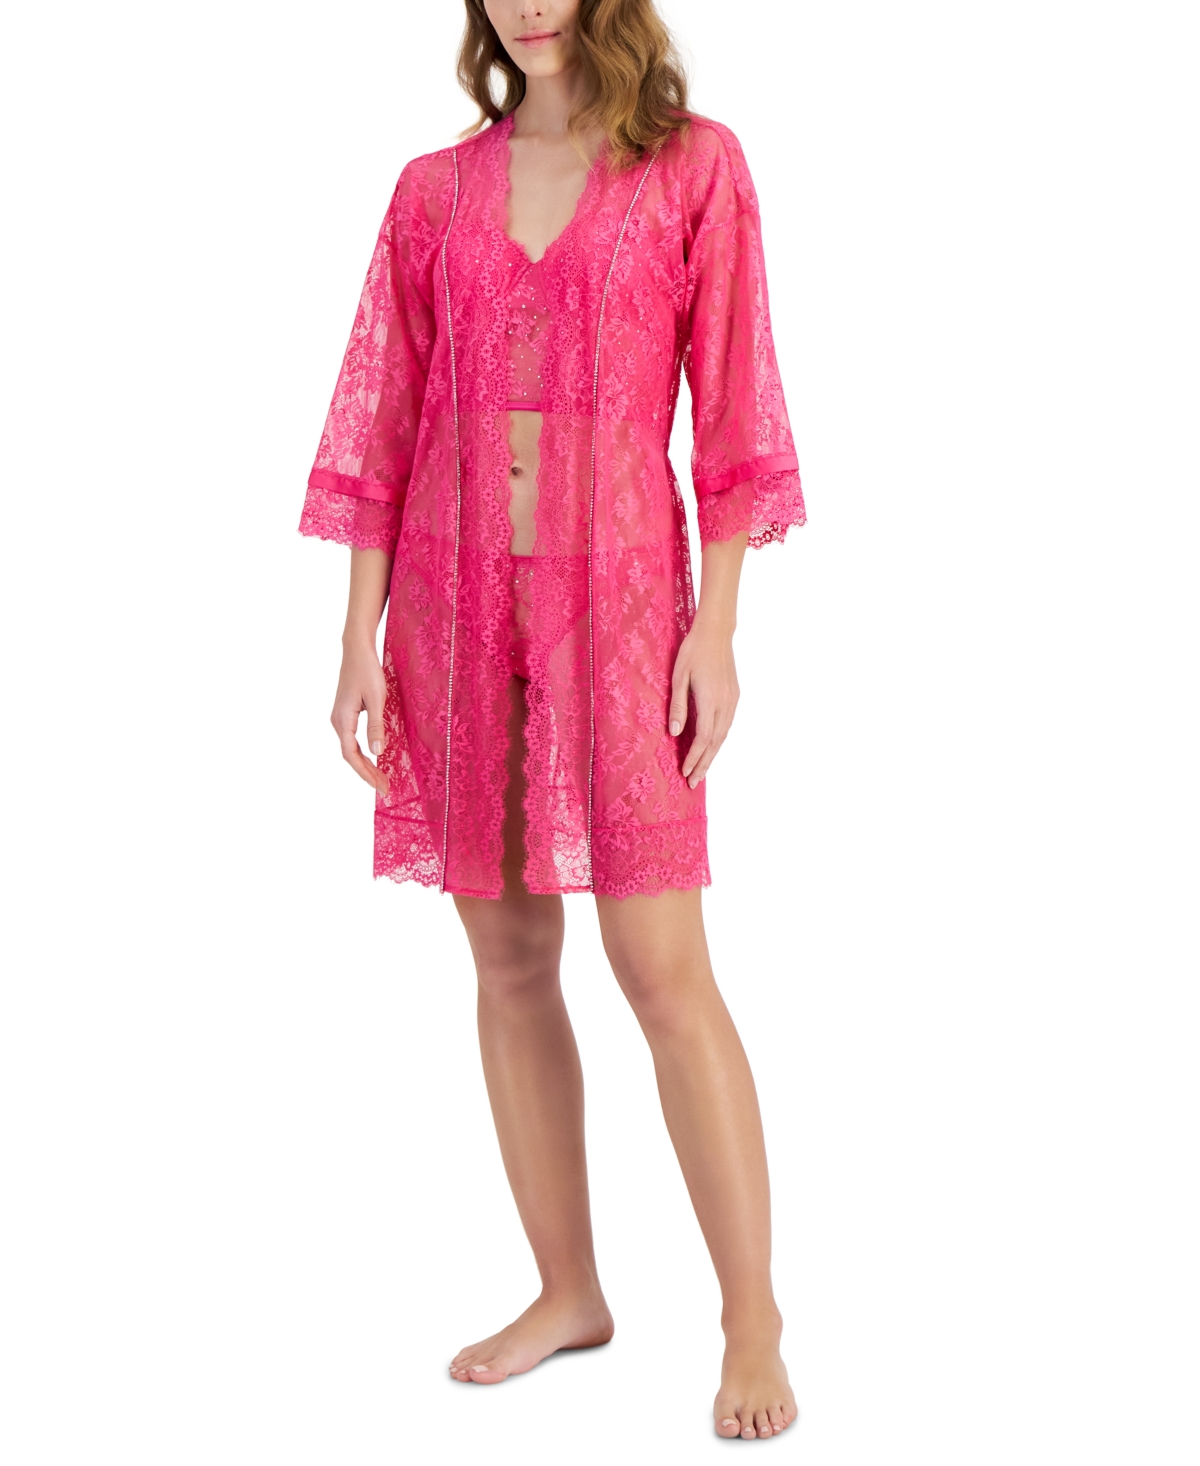 Women's Embellished Lace Robe, Created for Macy's - Pink